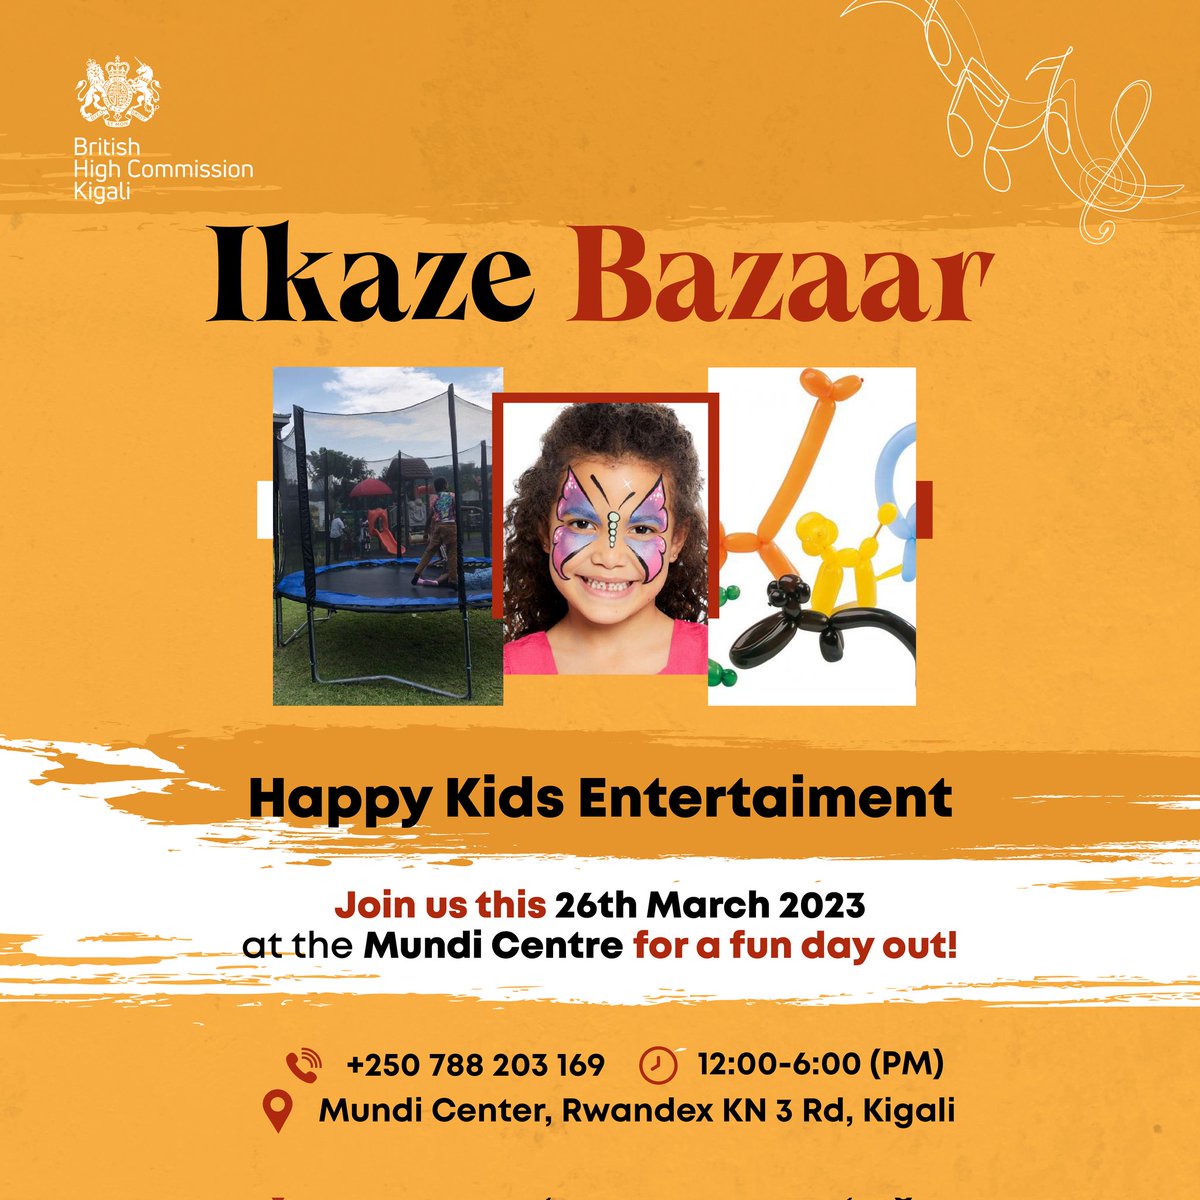 Bring the kids over to #IkazeBazaar this Sunday at @mundi_center for lots fun & entertainment. Let's meet there for a quality family time. Tell a friend to tell a friend! #inclusionUKRW